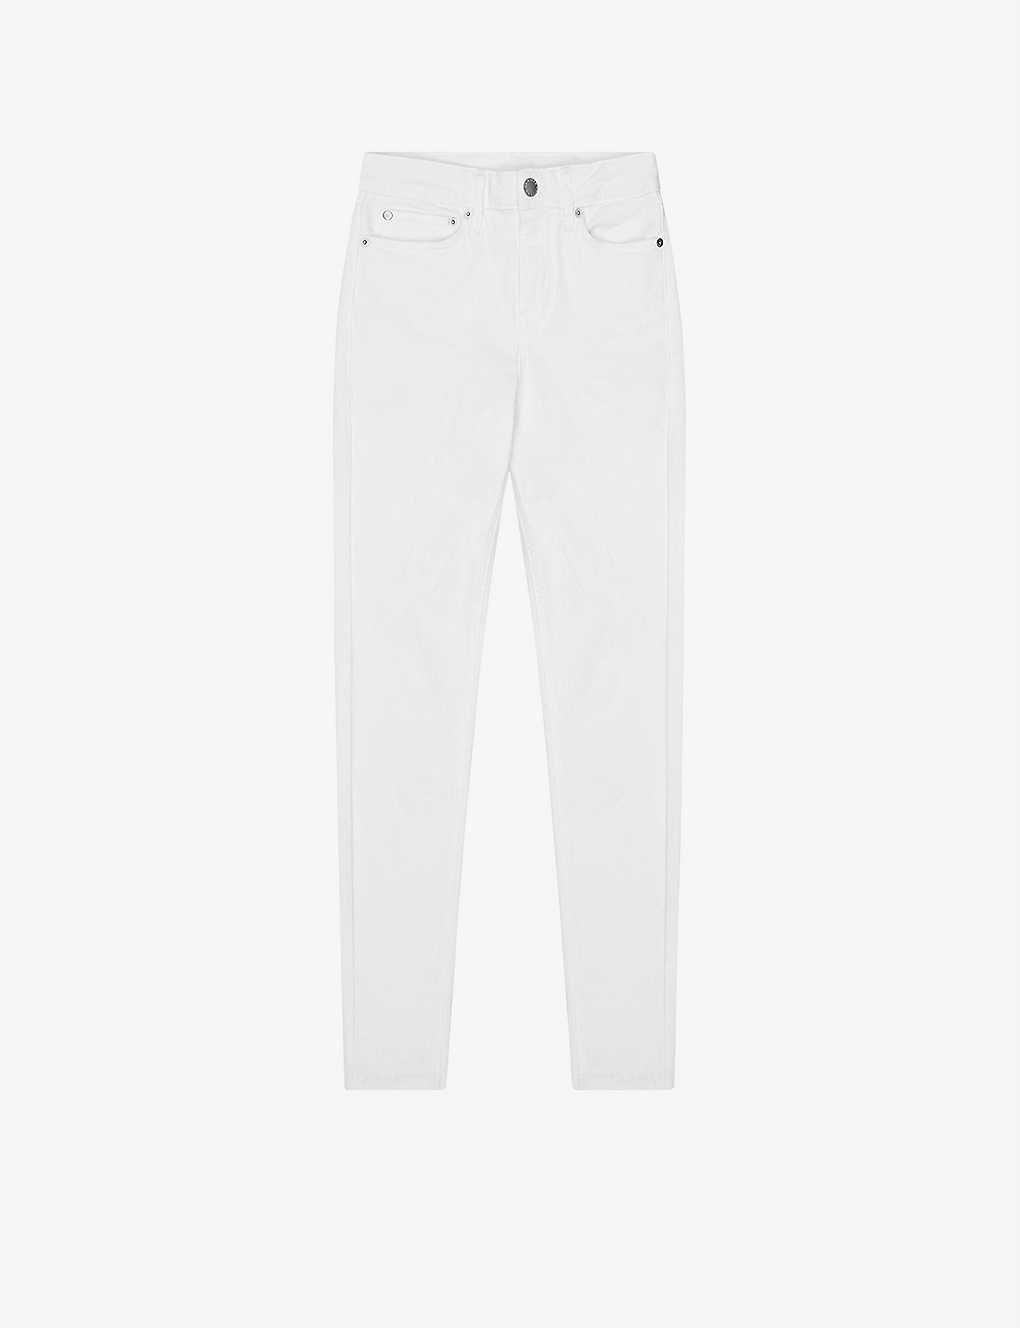 Reiss Lux Branded Skinny Mid-rise Stretch-denim Jeans in White | Lyst